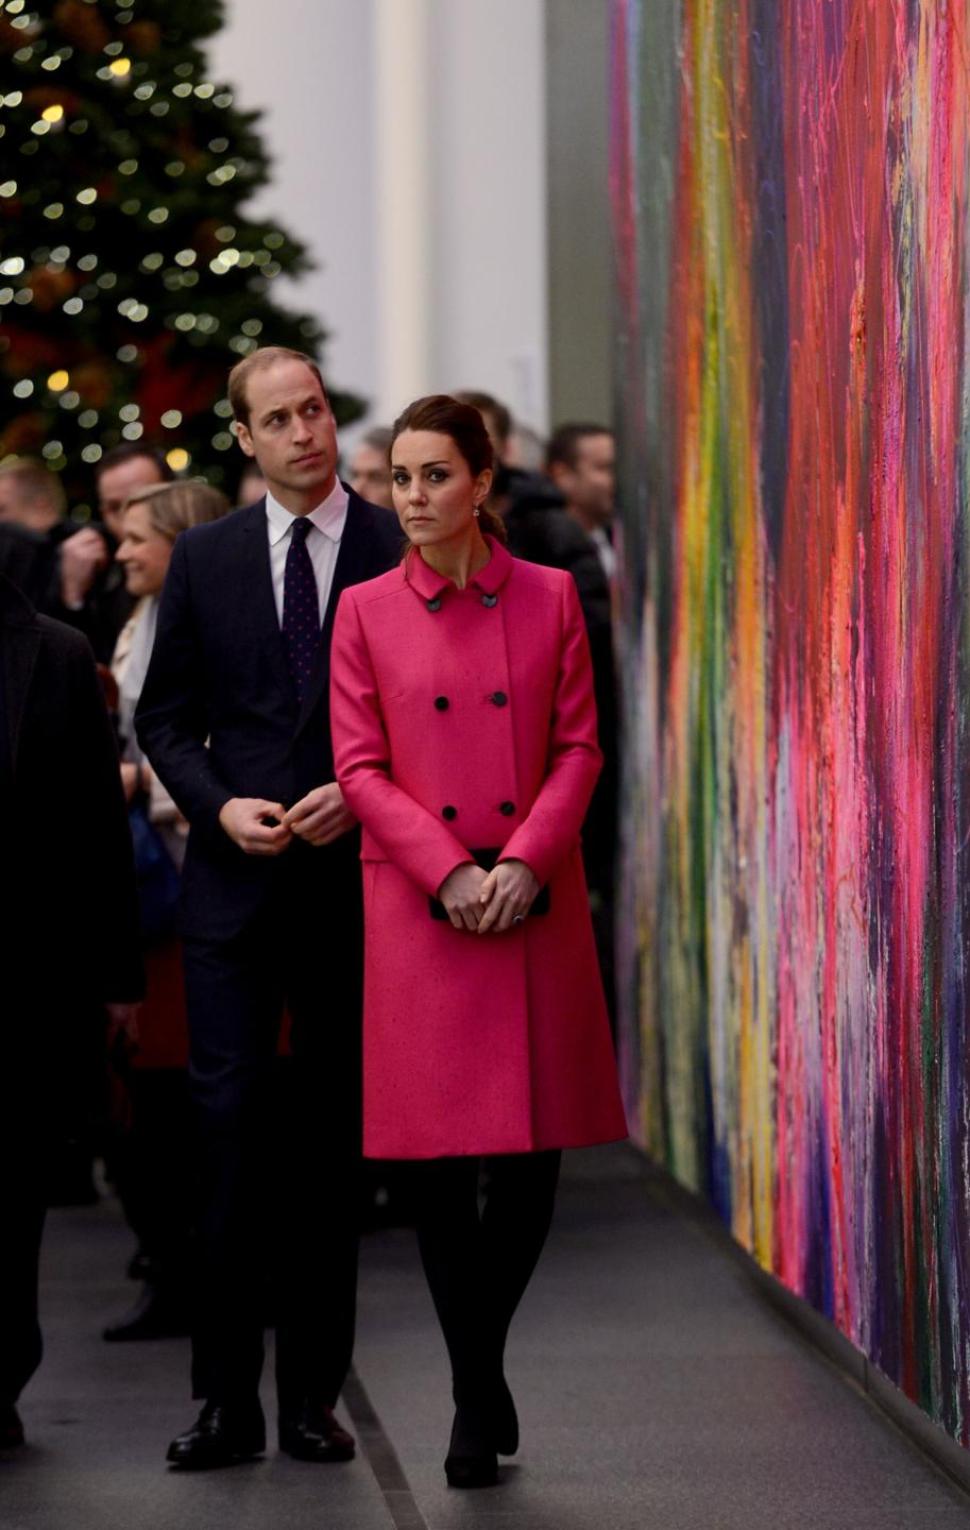 Prince William and Kate Middleton tour the lobby of One Worlds Trade Center after a visit to the National September 11 Memorial & Museum on Tuesday. New Yorkers were 'flipping out over' the royal couple's visit.